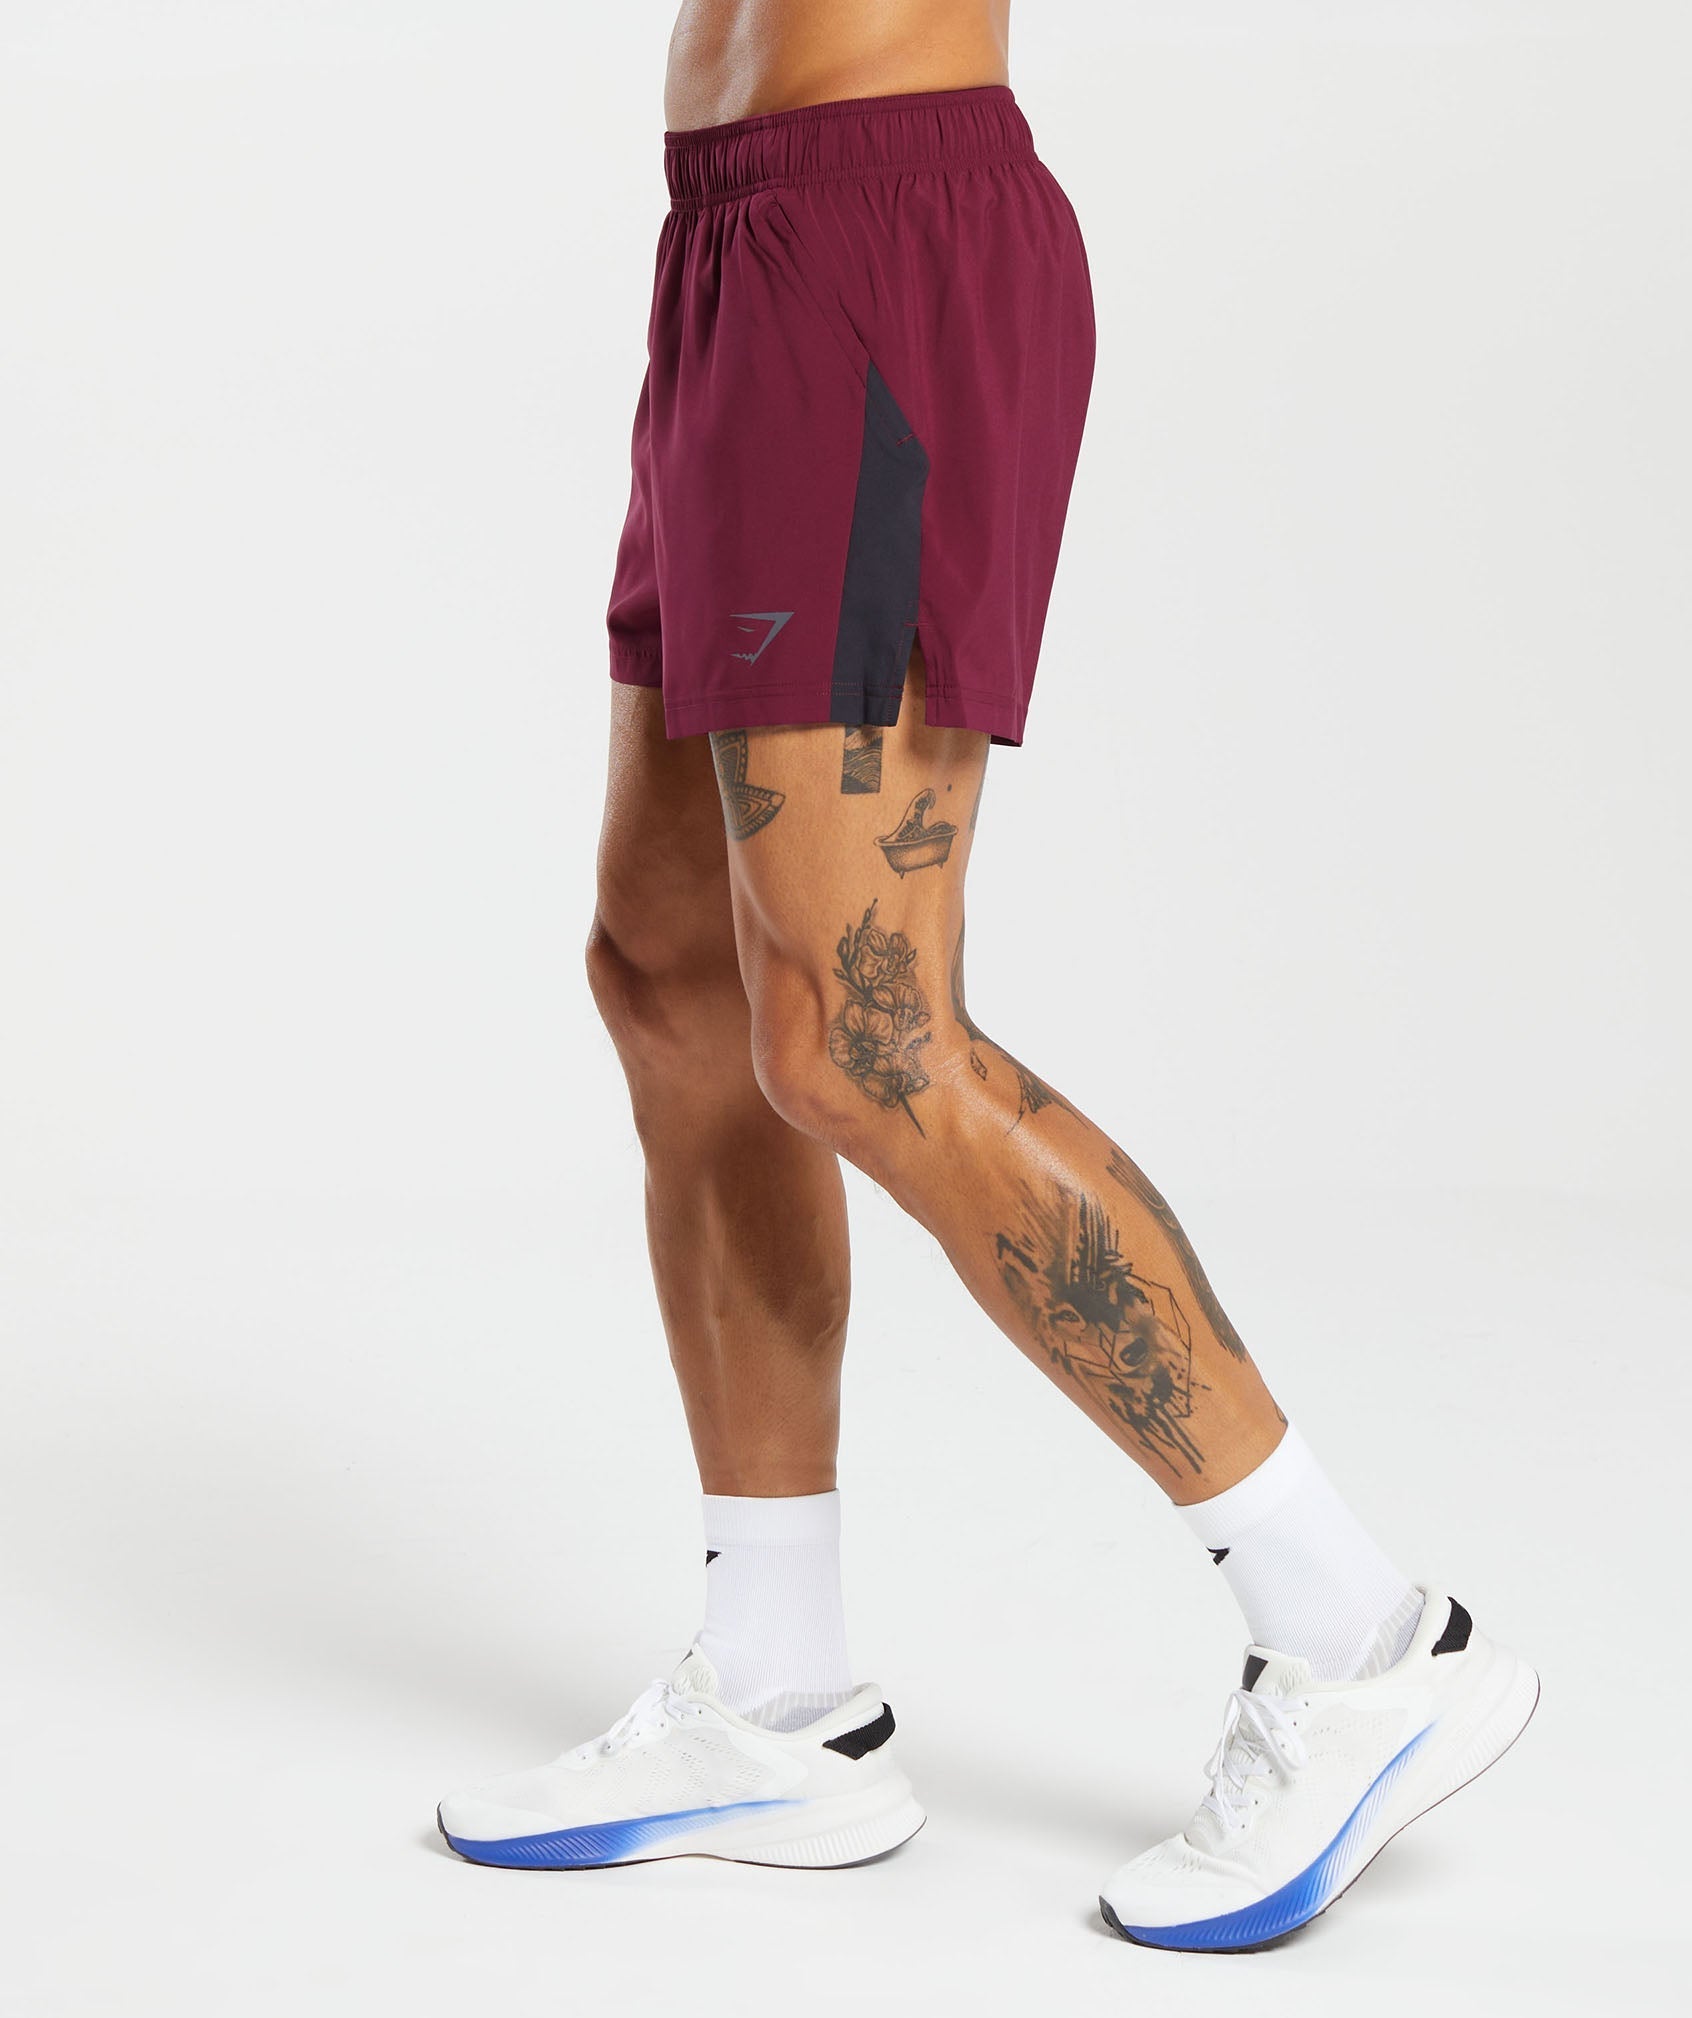 Sport 5" Shorts in Plum Pink/Black - view 3